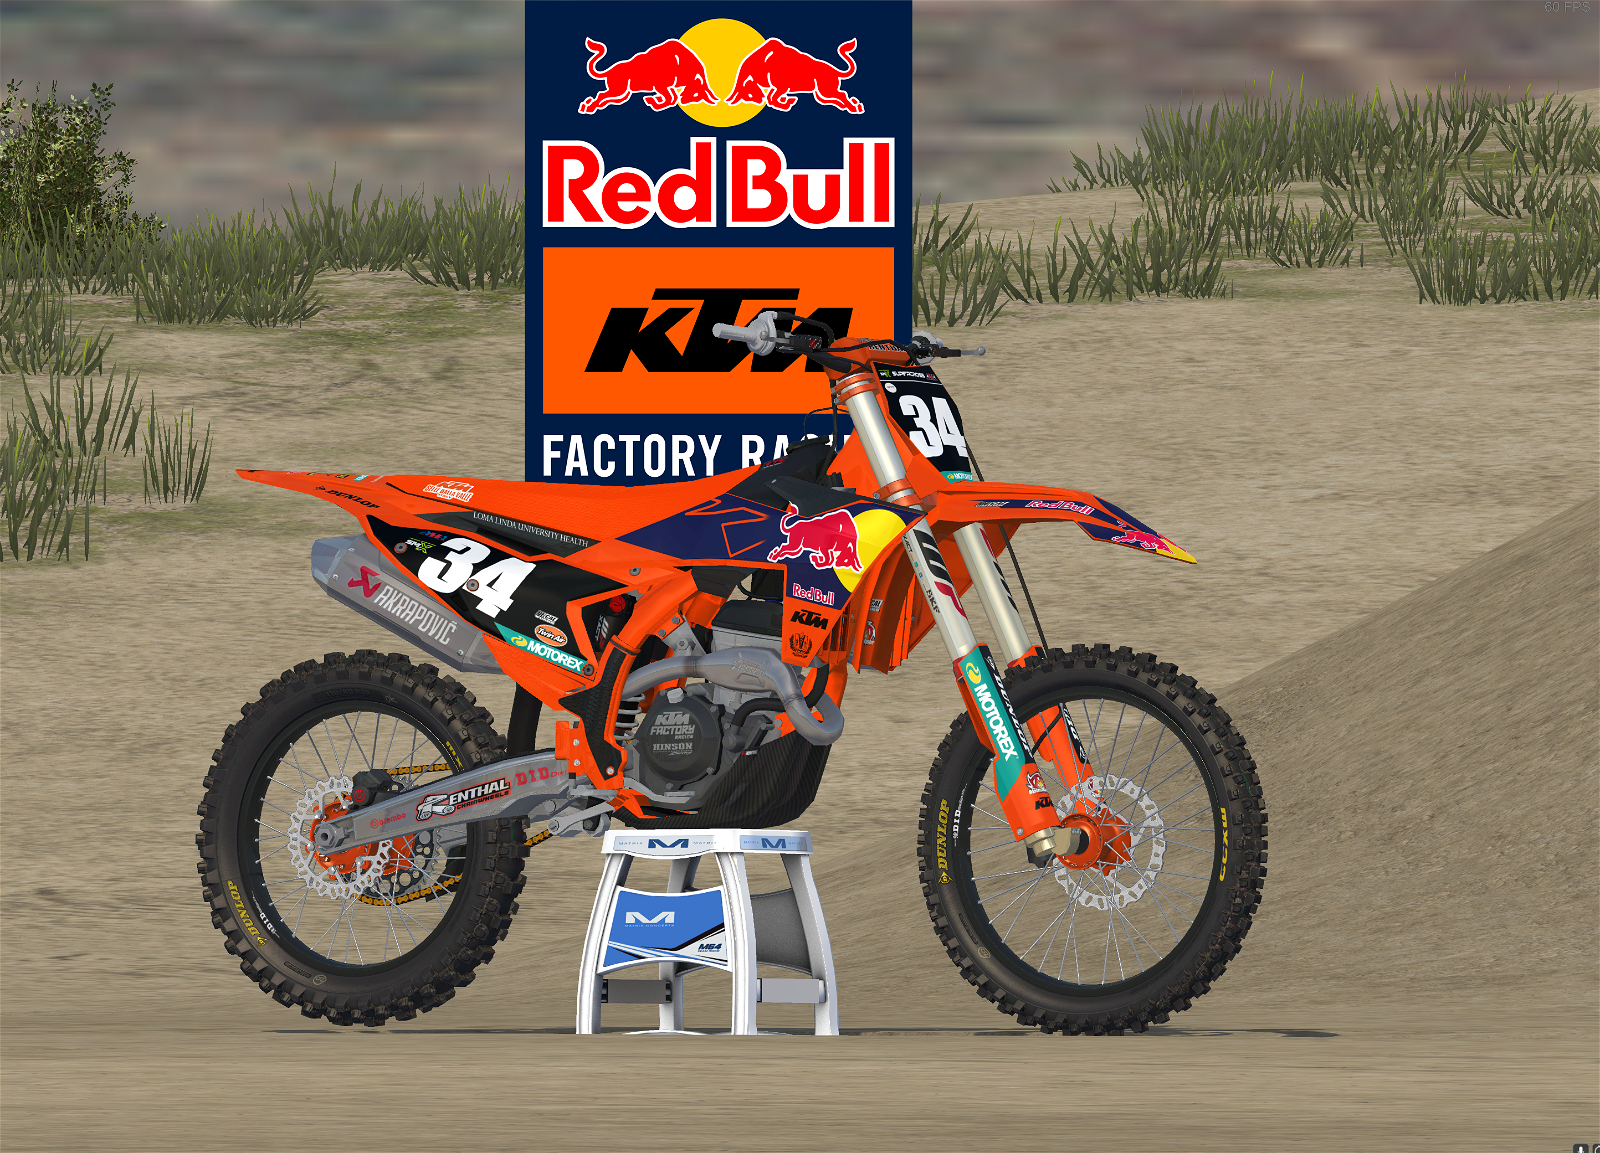 Looking Back at the 2023 MXGP and Red Bull KTM Factory Season With